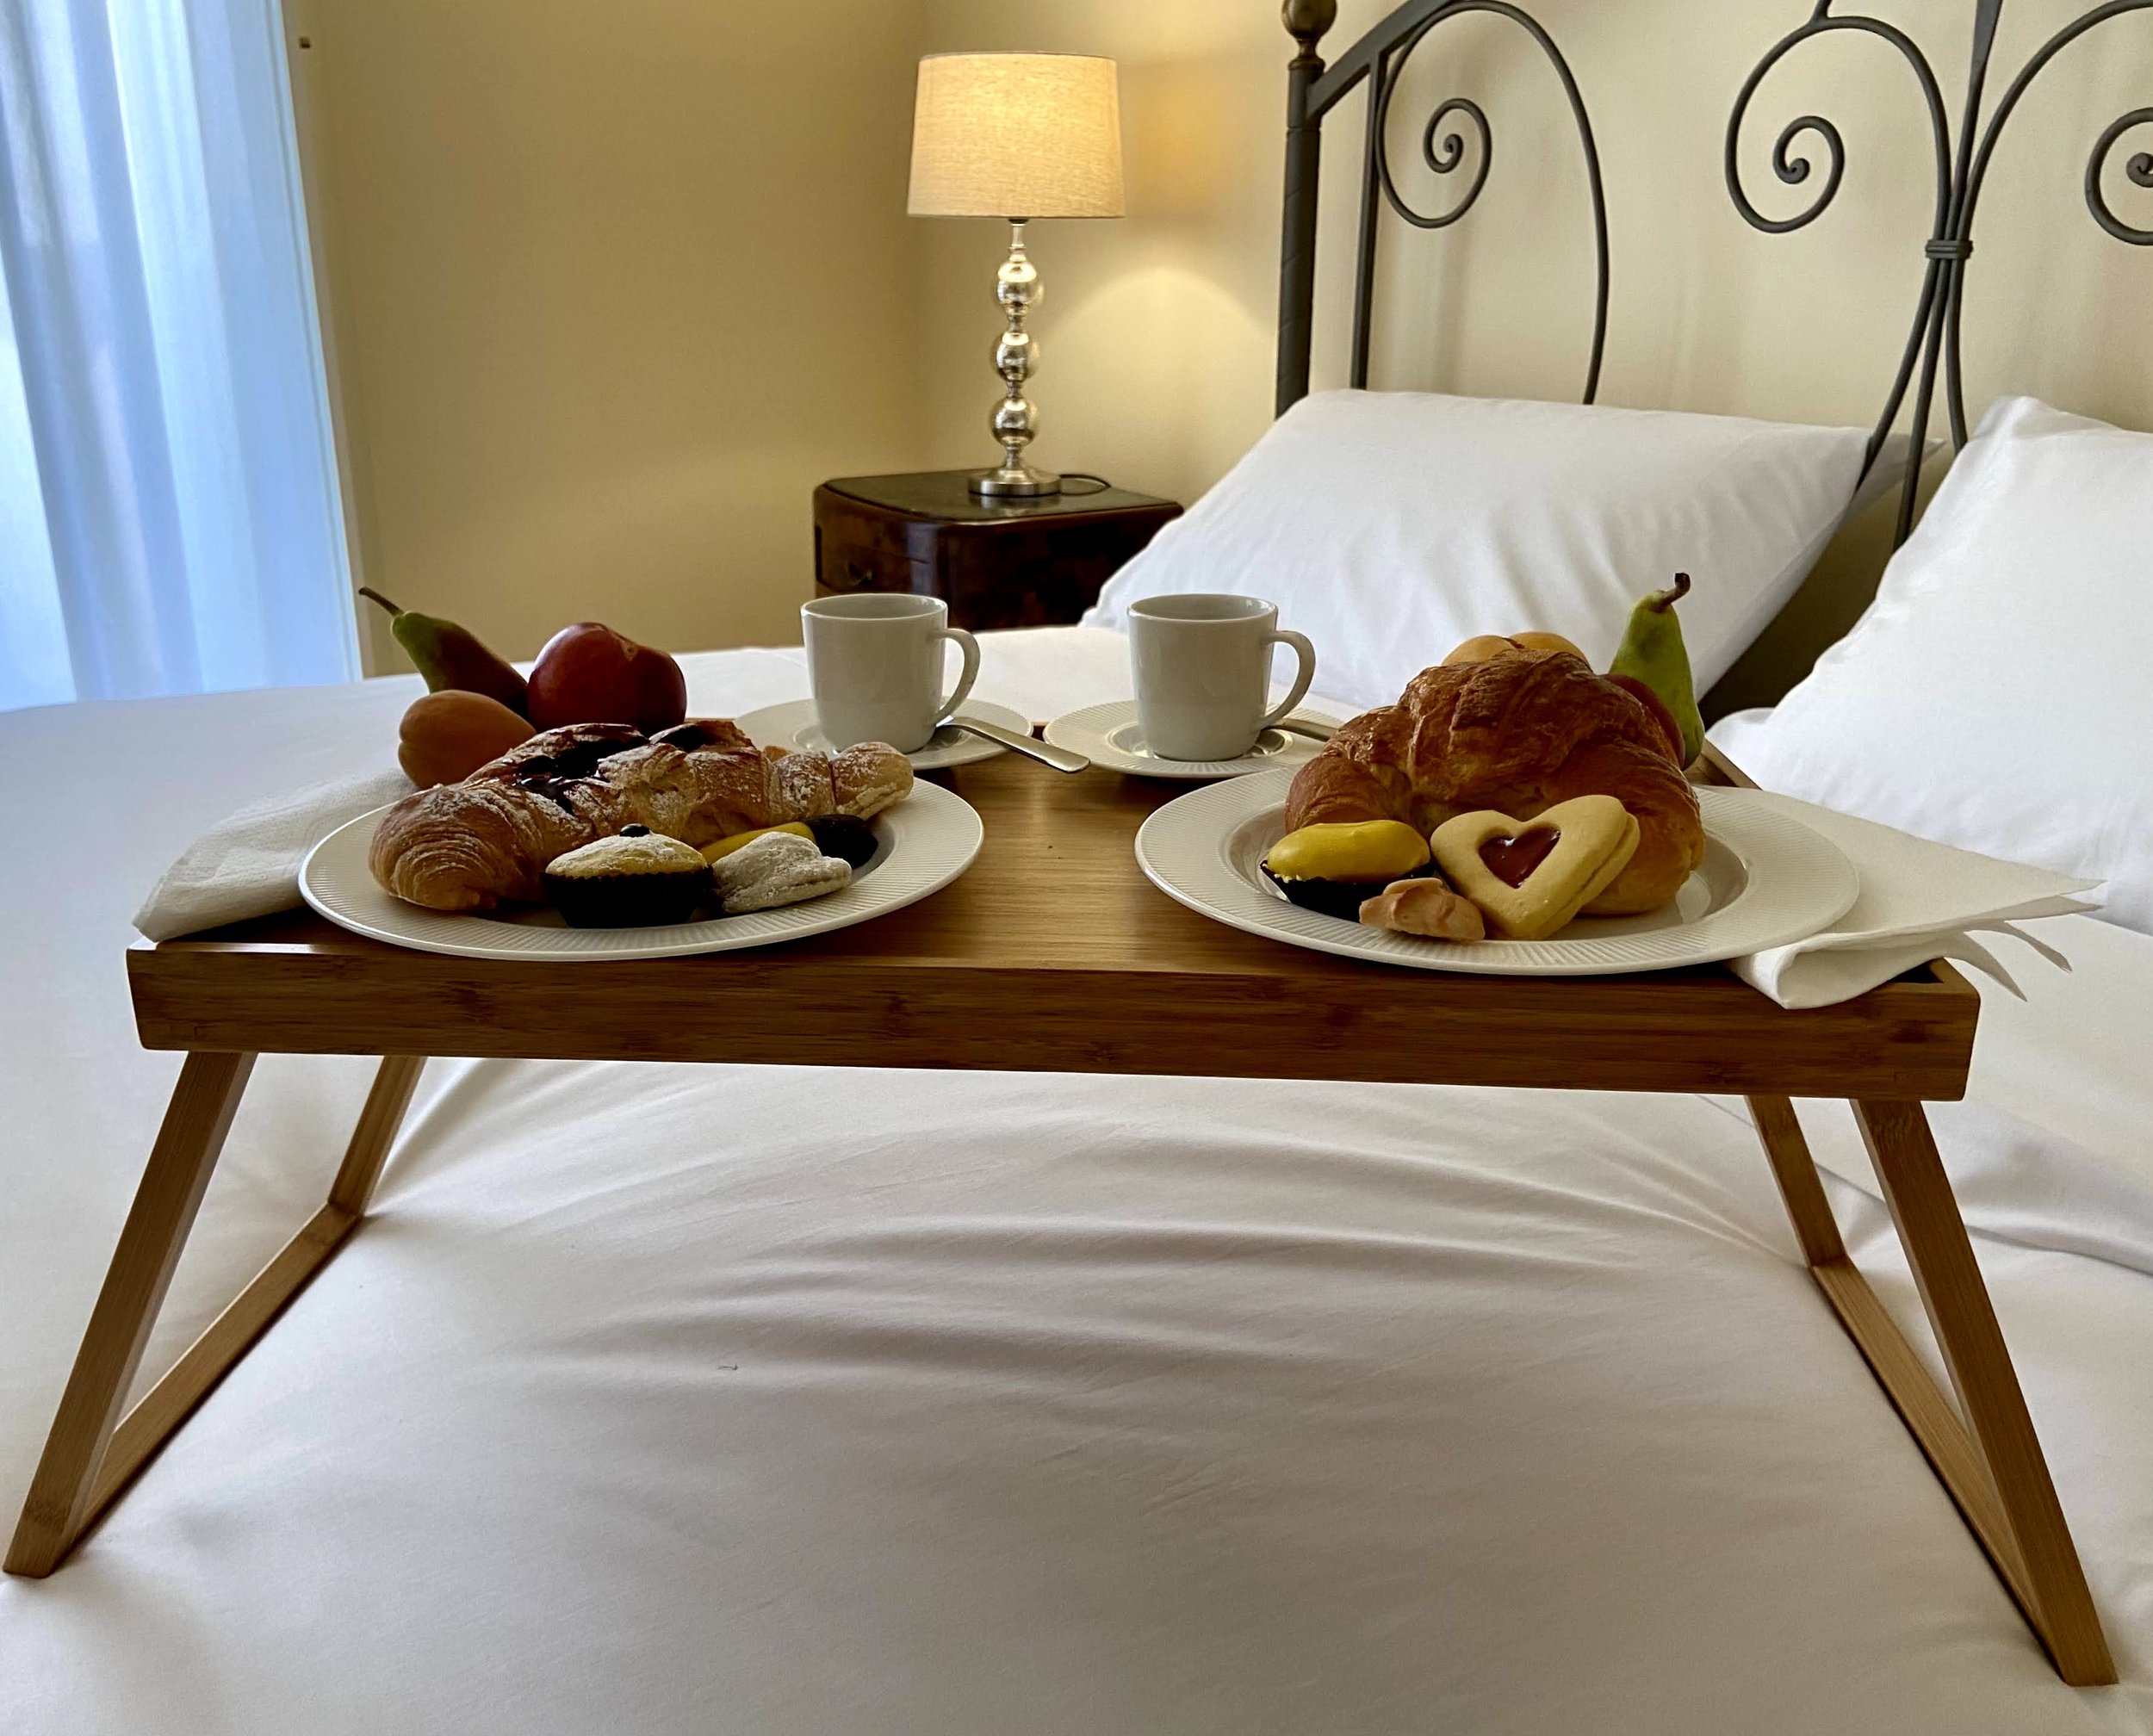 Room service breakfast tray with sweet delicacies